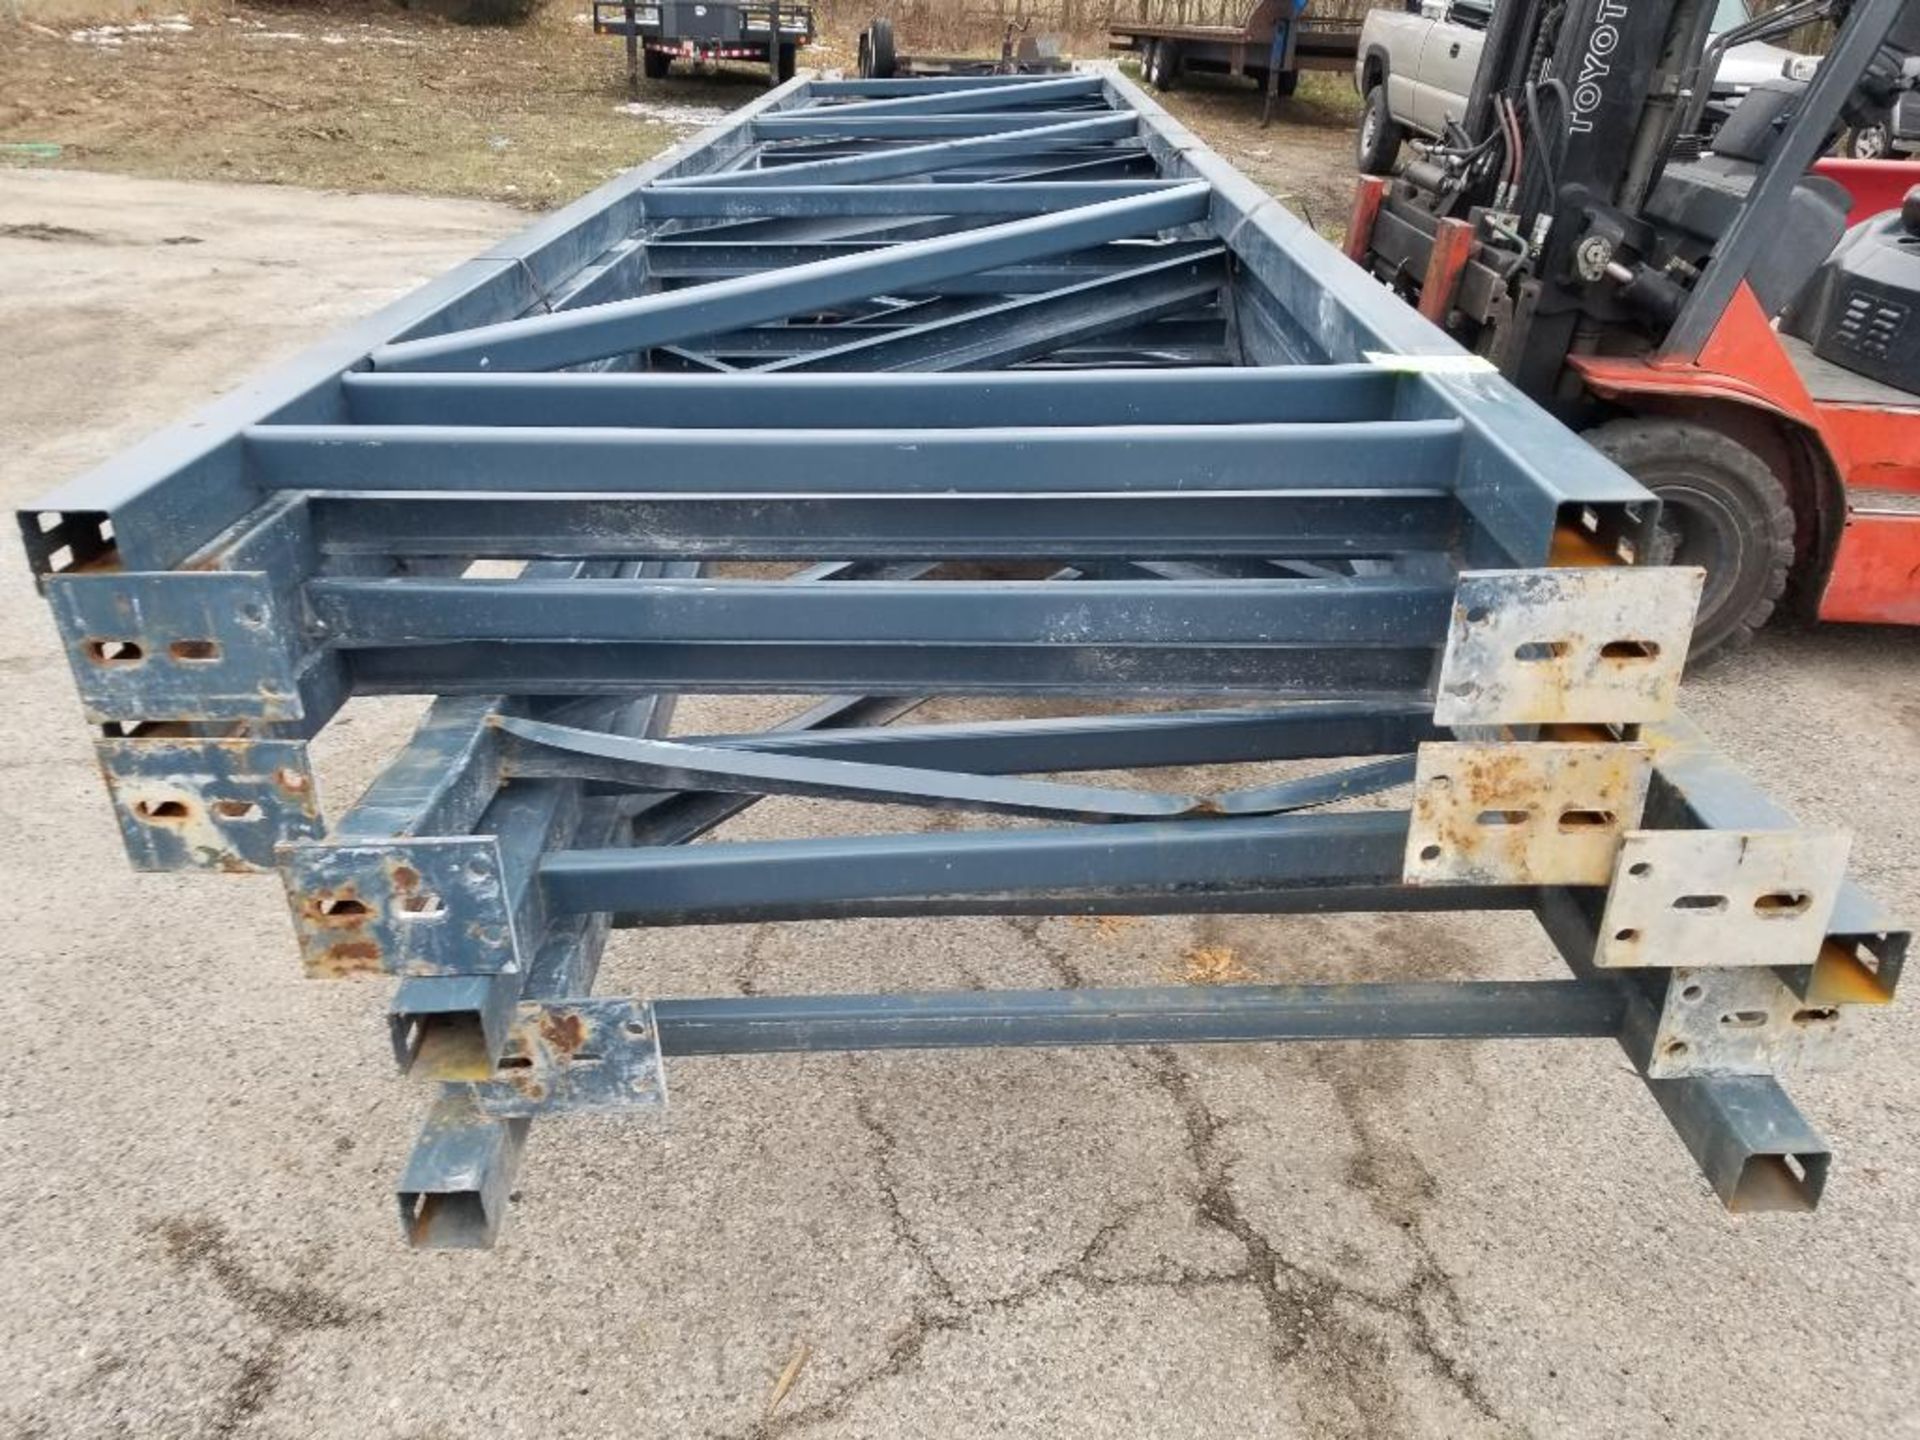 Qty 8 - Pallet racking uprights. 210in tall x 49in wide. - Image 6 of 7